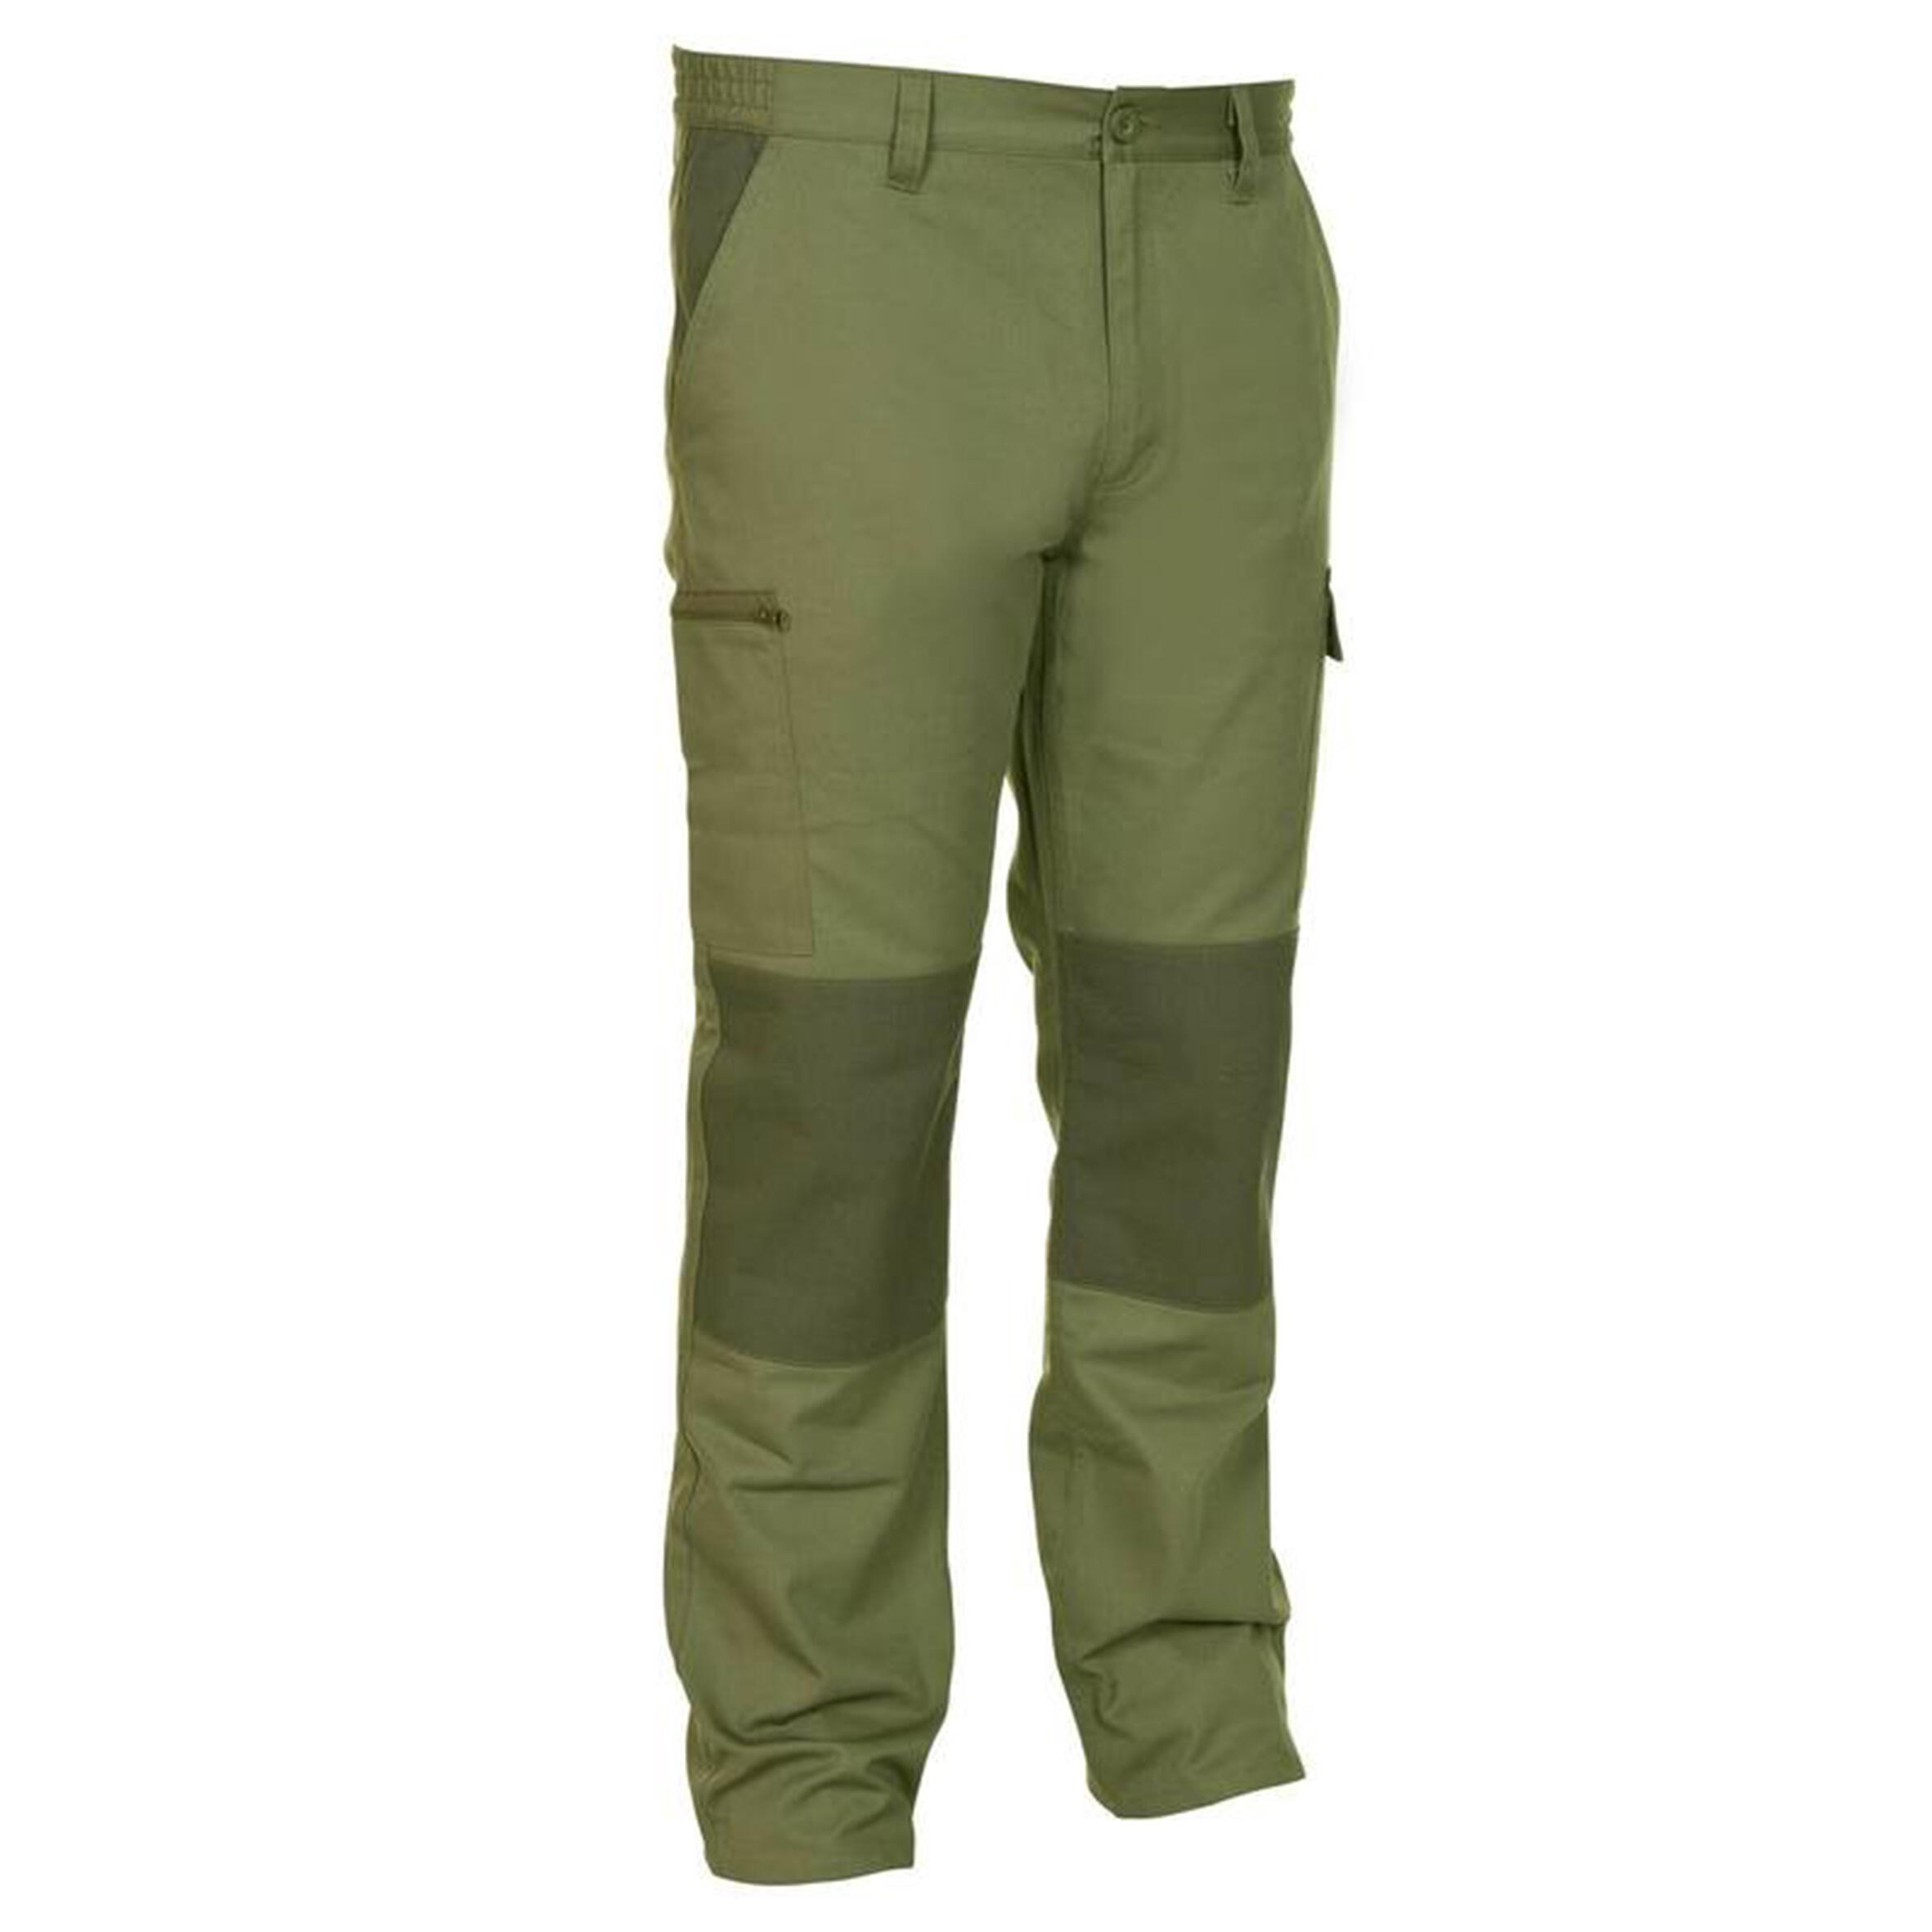 Steppe 300 twocolour hunting trousers